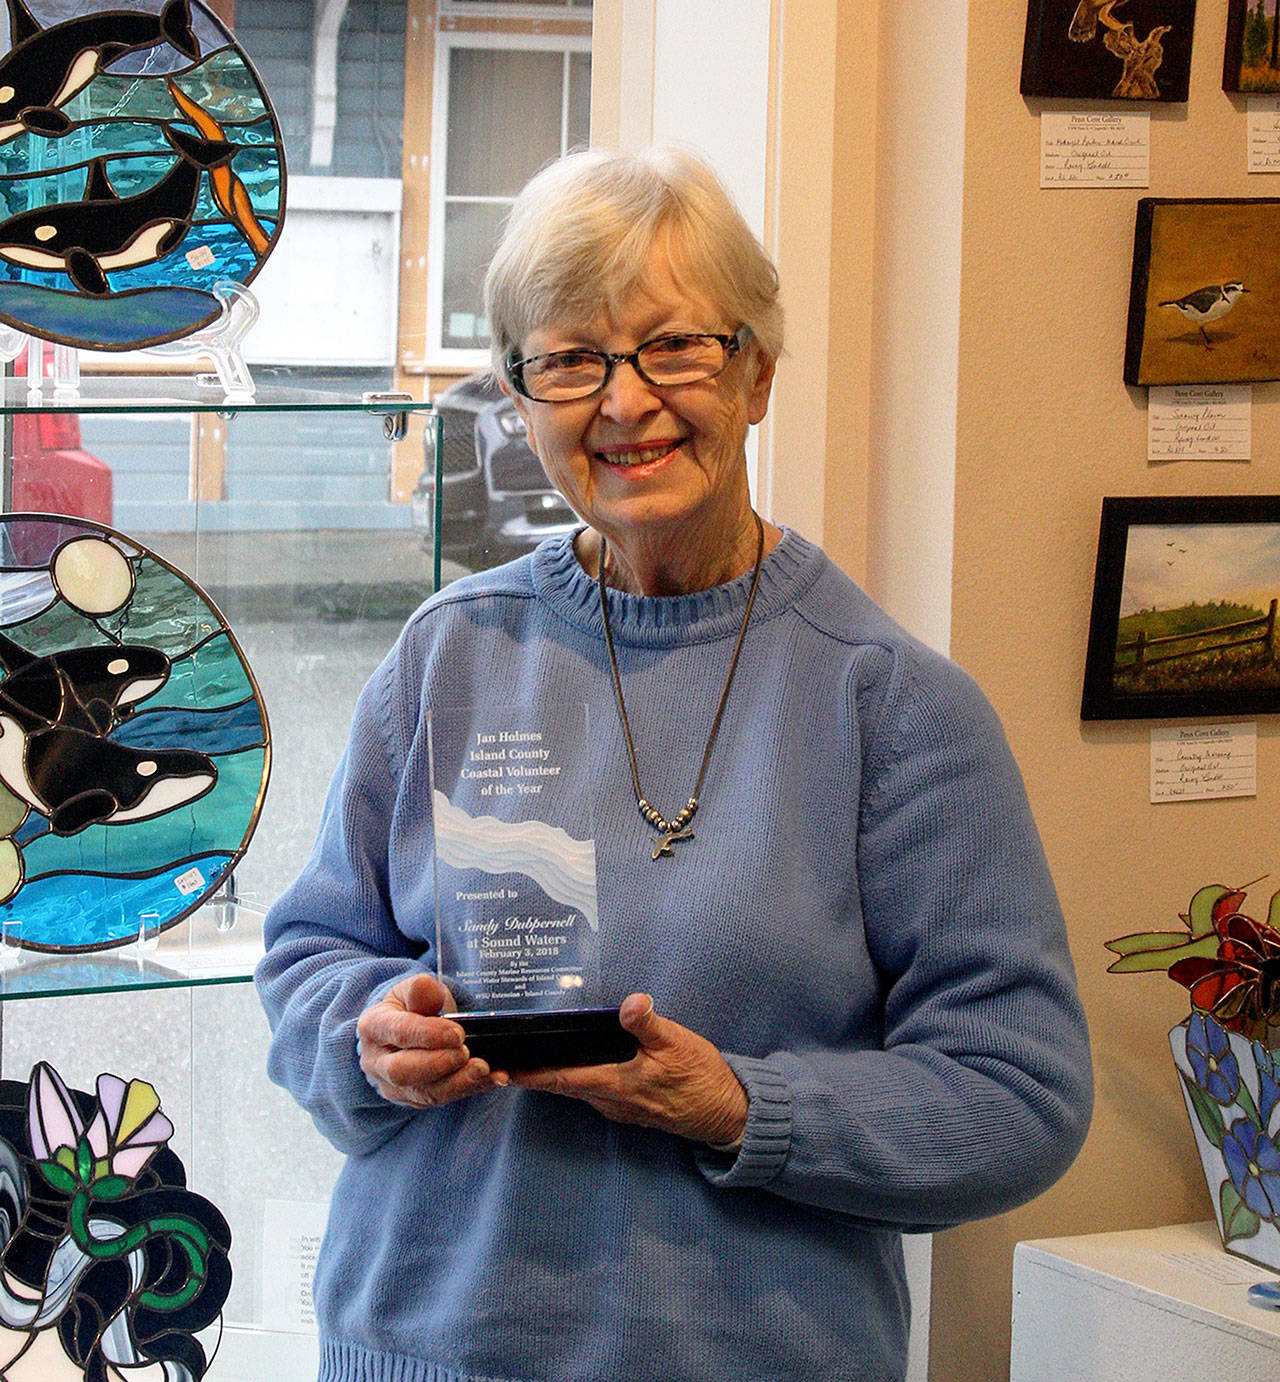 Jill Hein photo — Coupeville resident Sandy Dubpernell holds her Jan Holmes Island County Volunteer of the Year award plaque.